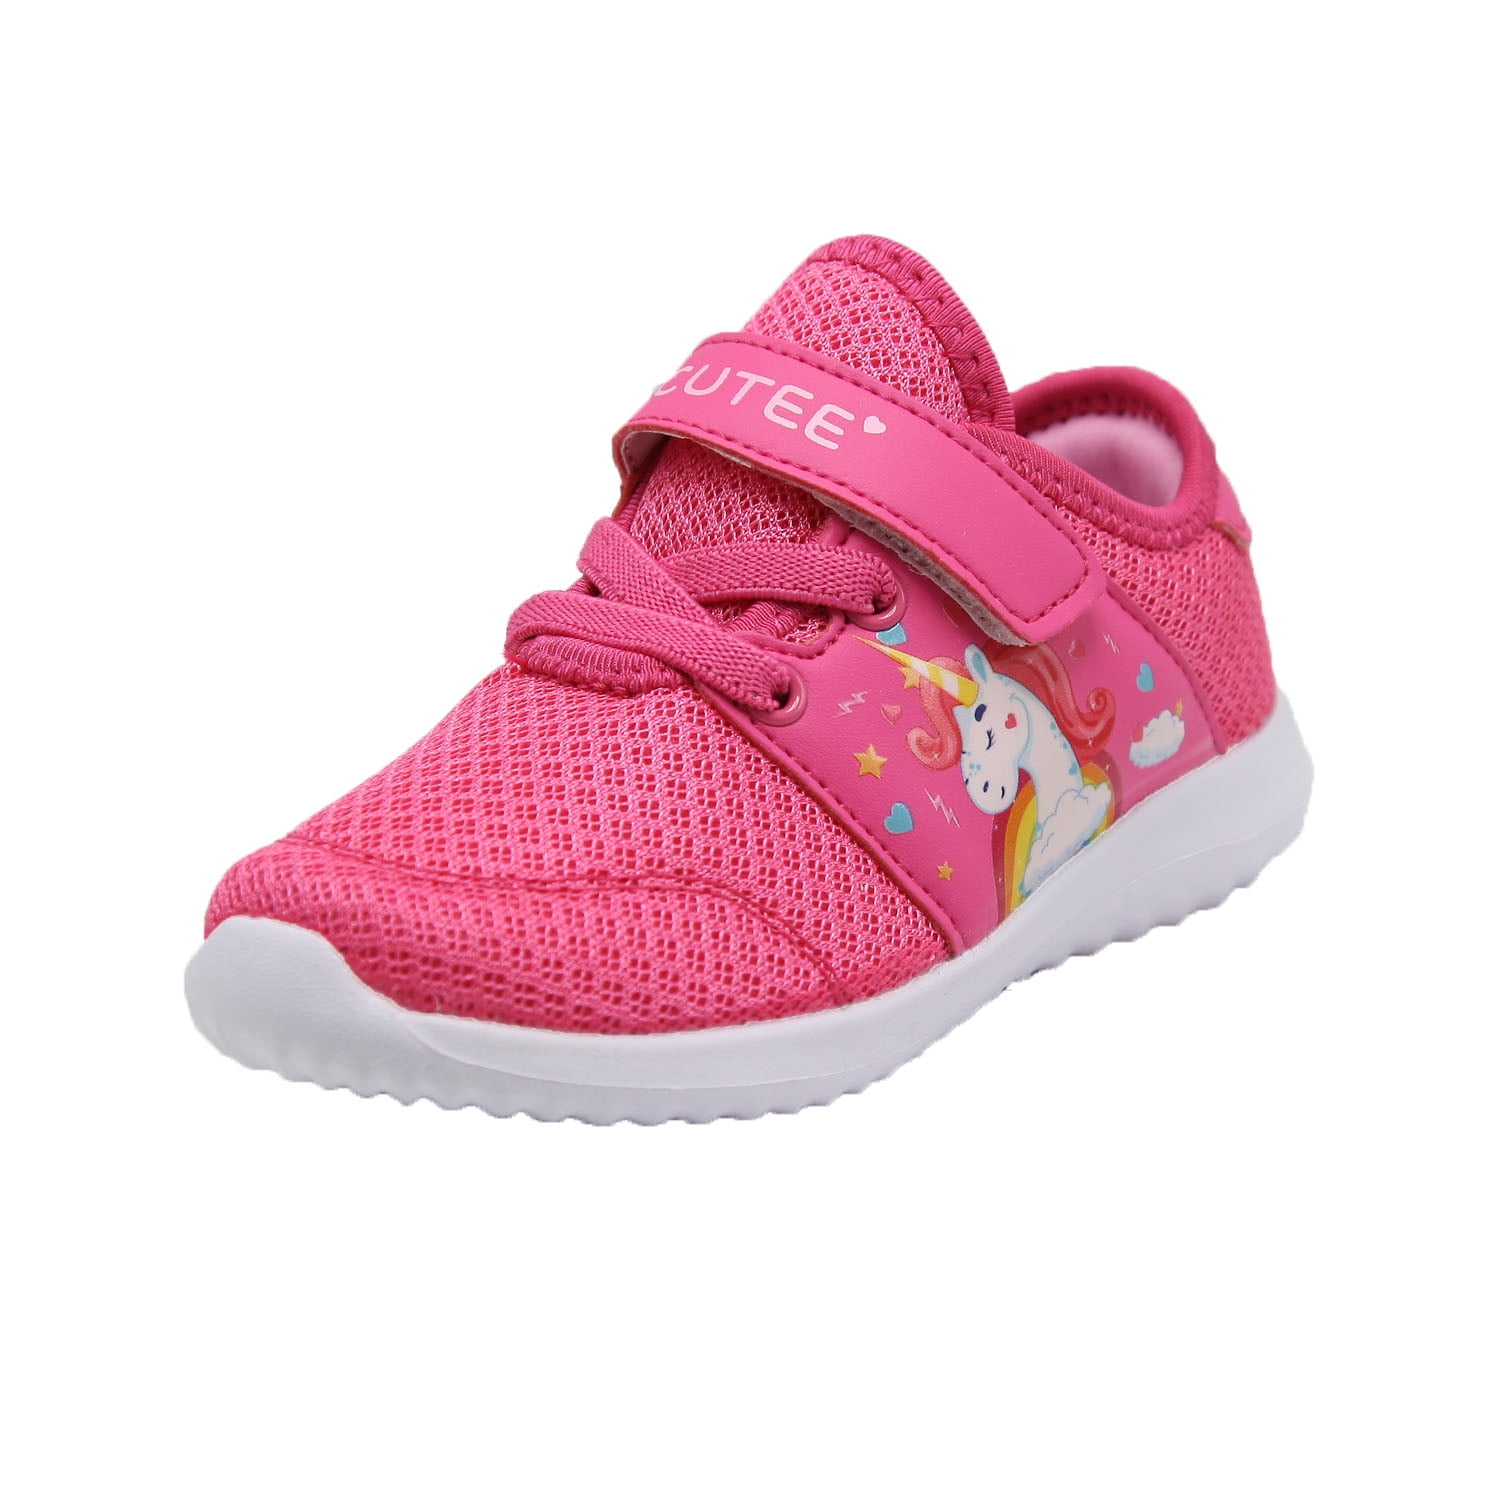 Size 5 Swiggles Toddler Girl's Pink Sparkling Casual Shoes Hook & Loop Strap 